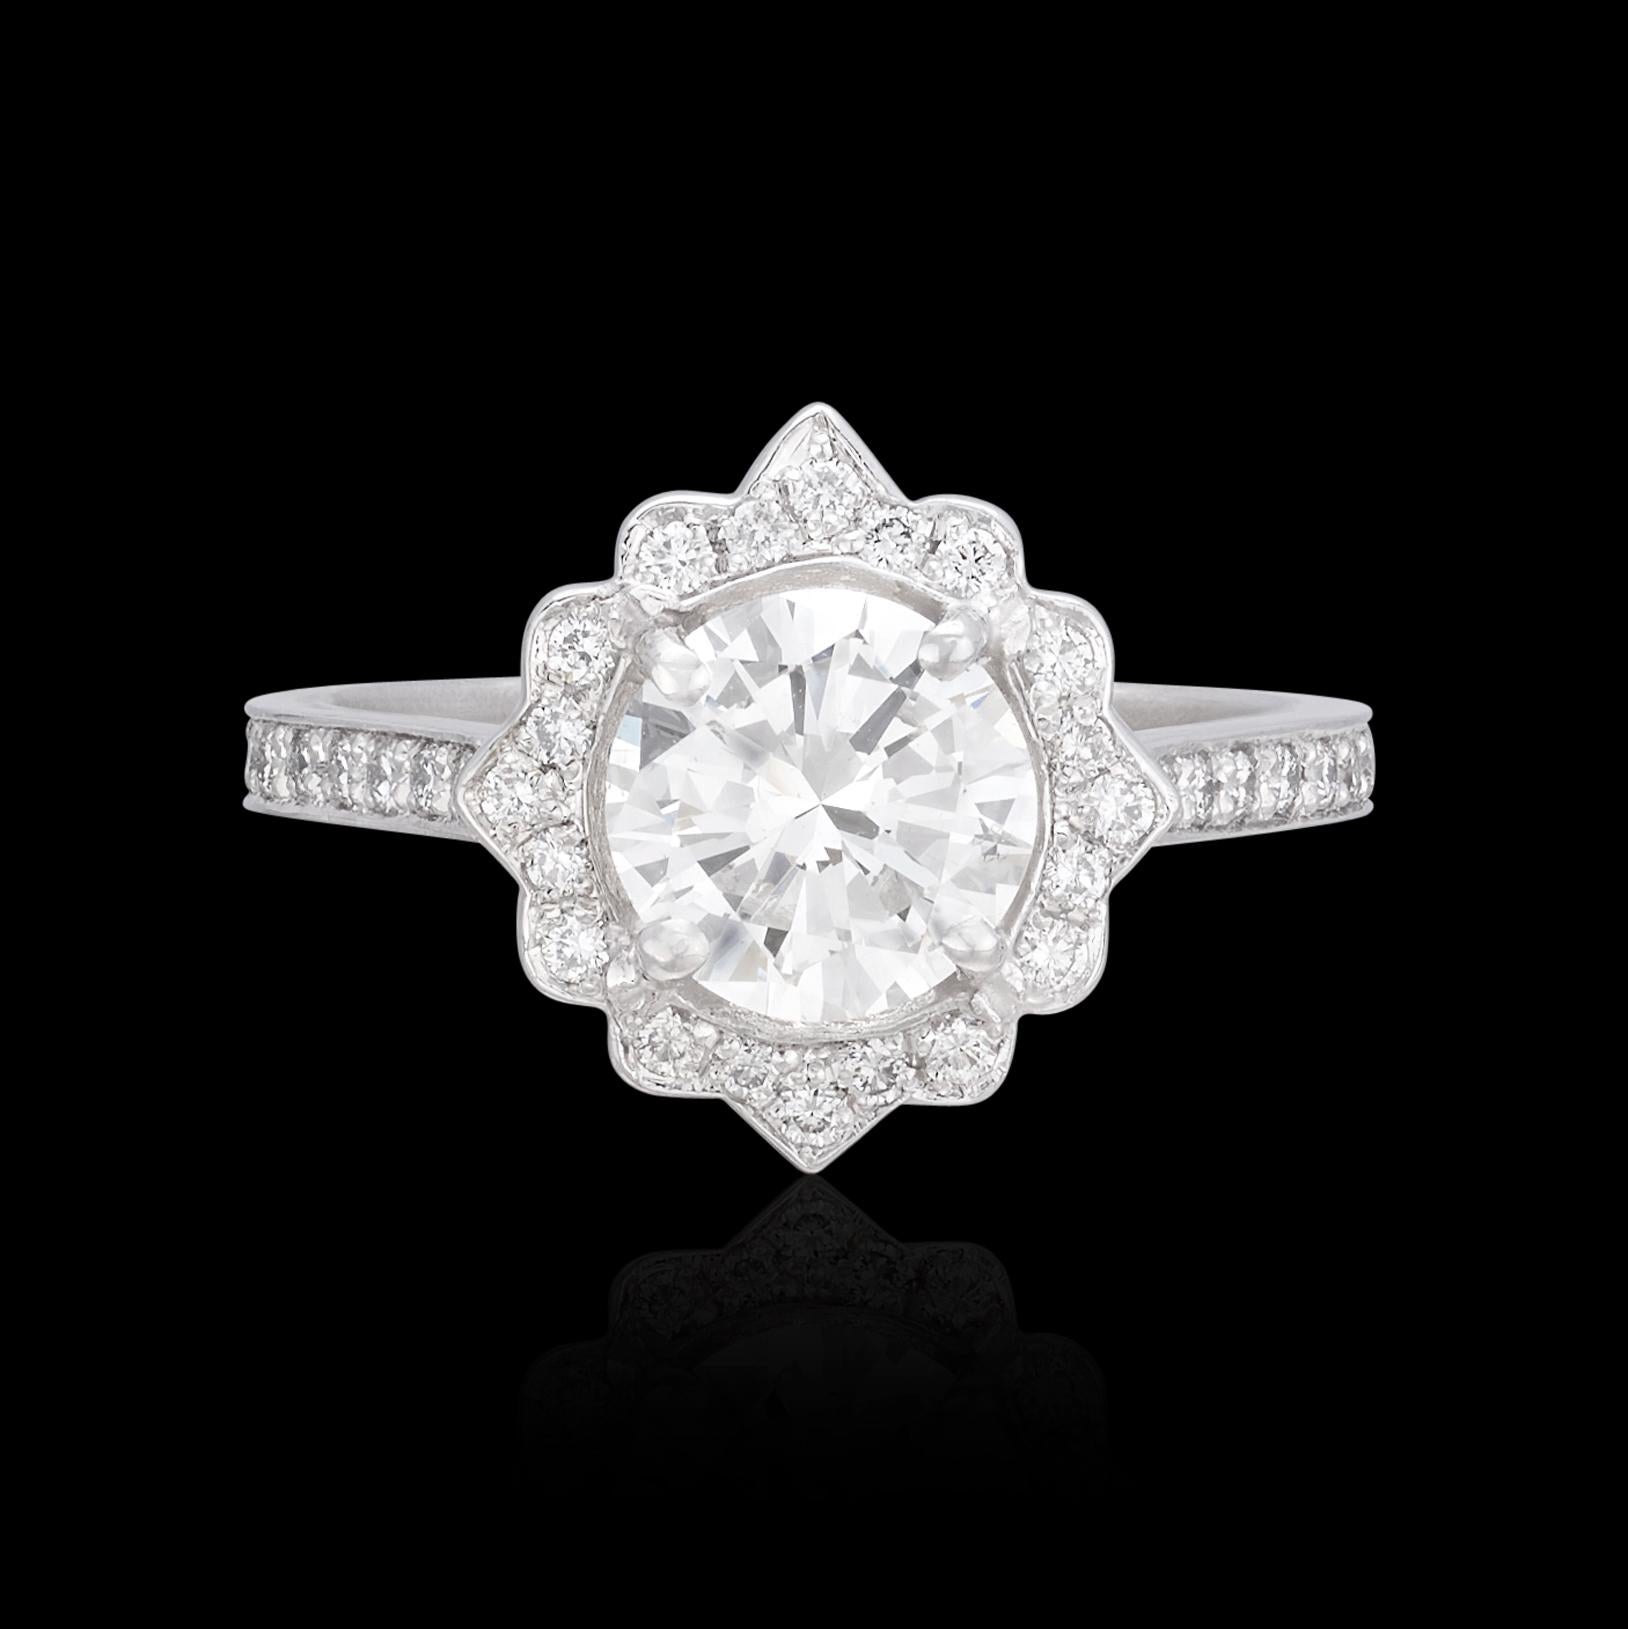 Romantic and eye-catching, the platinum ring features a gorgeous 1.22-carat round brilliant-cut diamond, GIA graded J/SI1, in a delicate floral design mounting set with 38 accent round brilliant-cut diamonds, giving the ring a total weight of